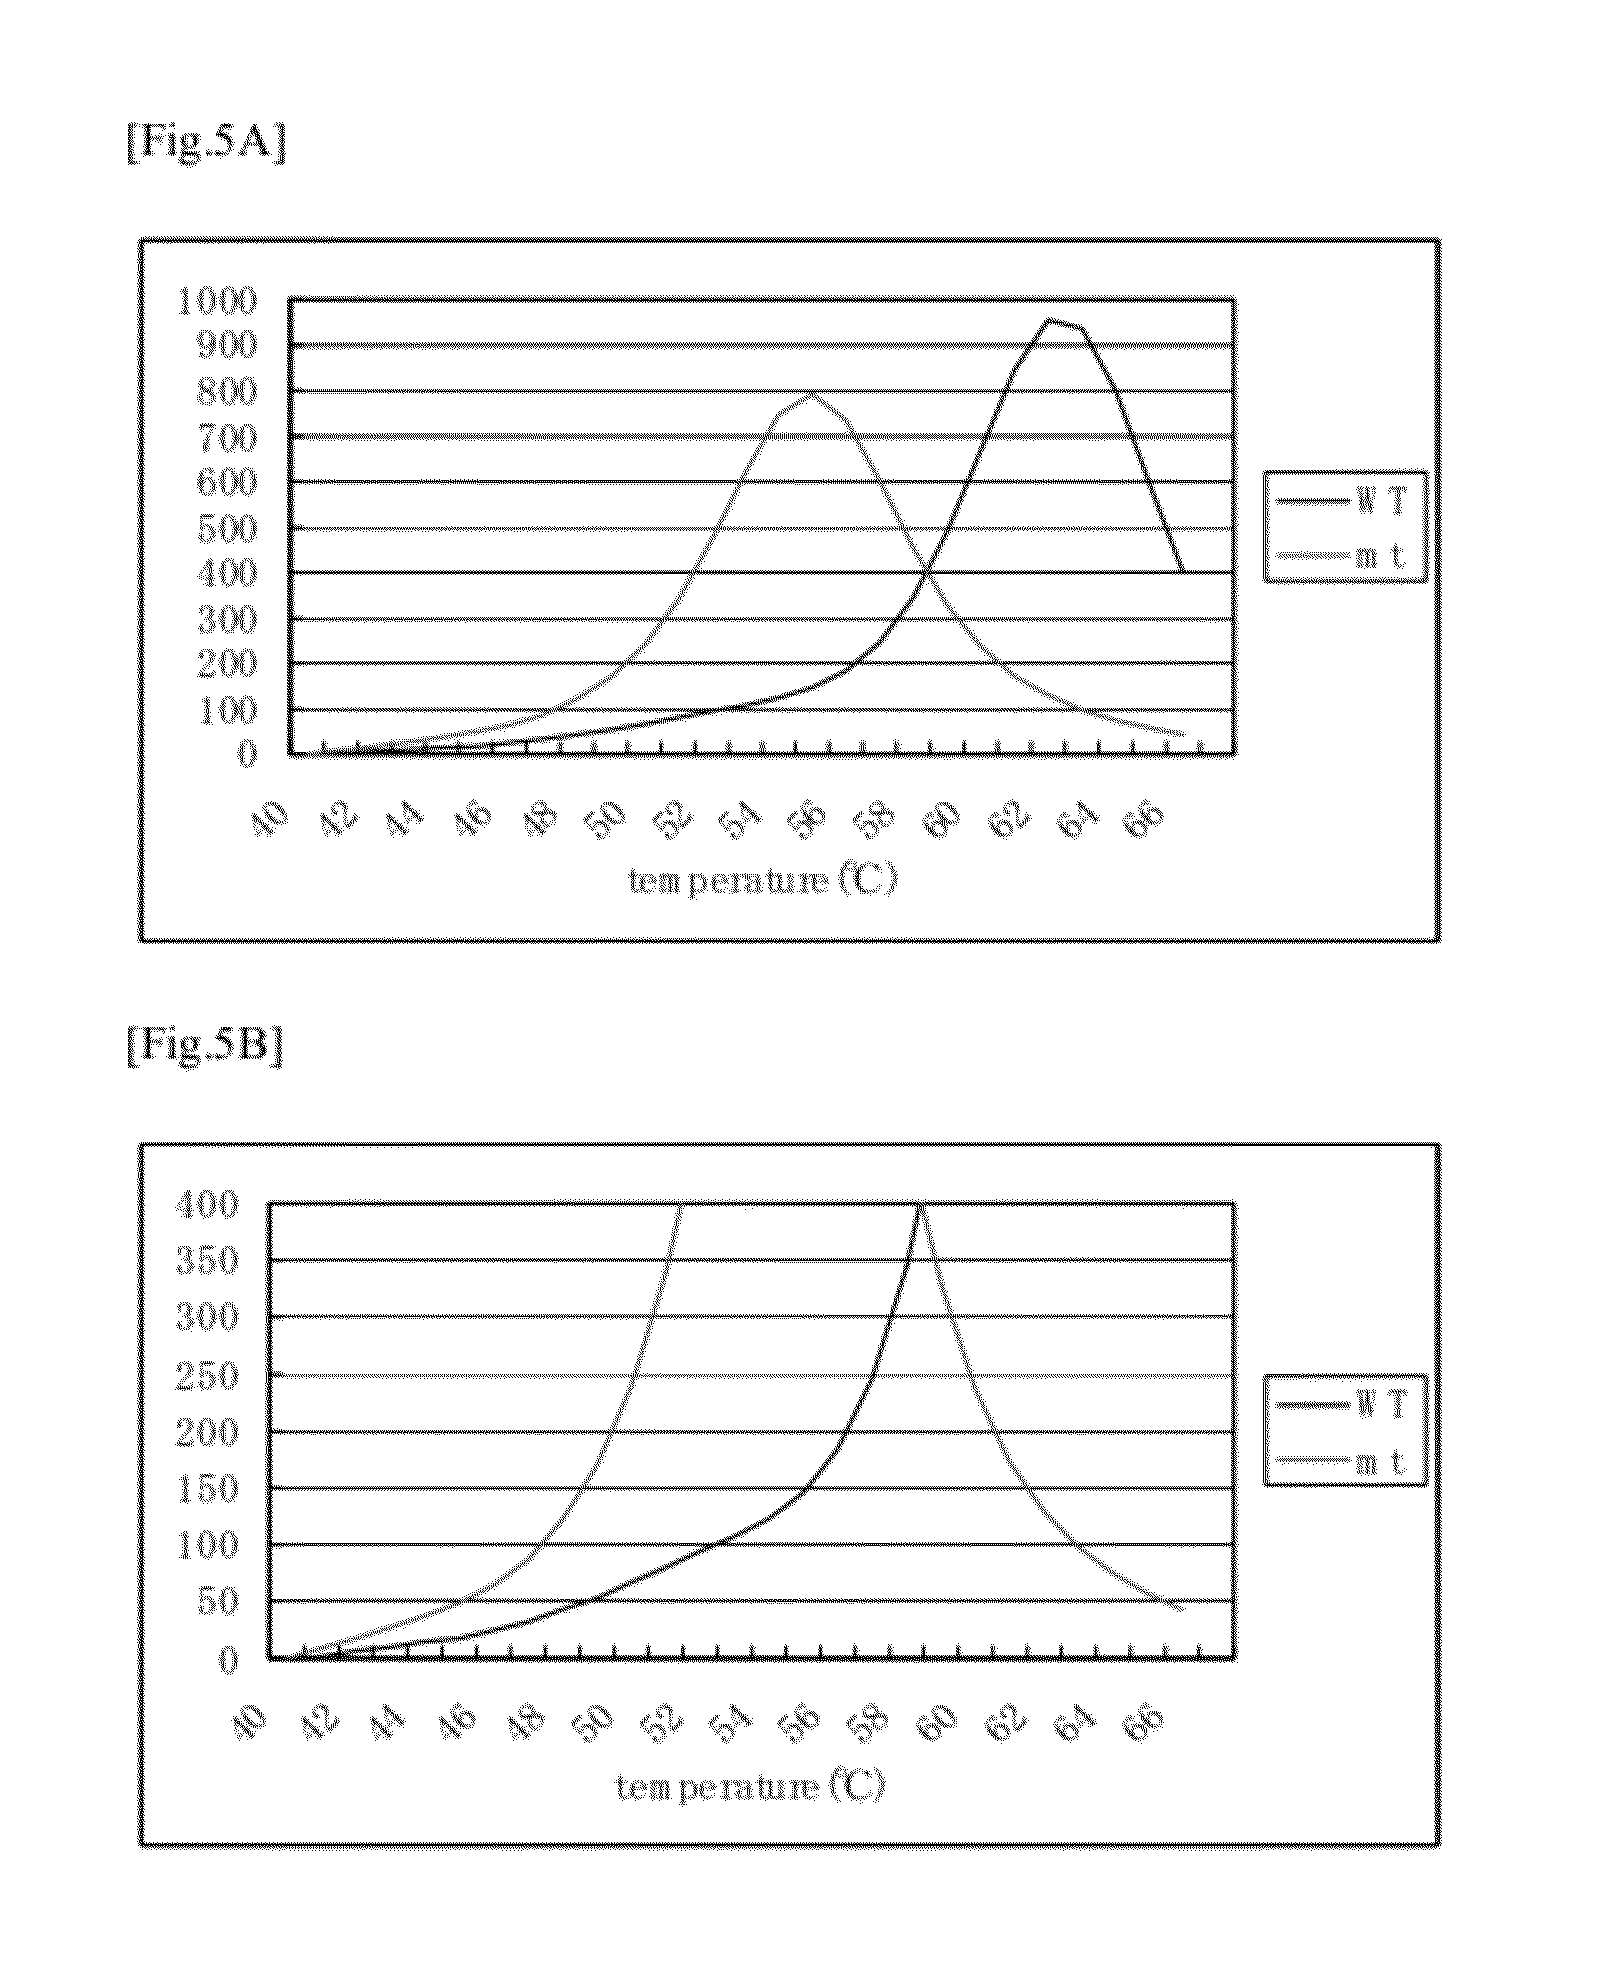 Method for Simultaneously Detecting Polymorphisms of Acetaldehyde Dehydrogenase 2 and Alcohol Dehydrogenase 2